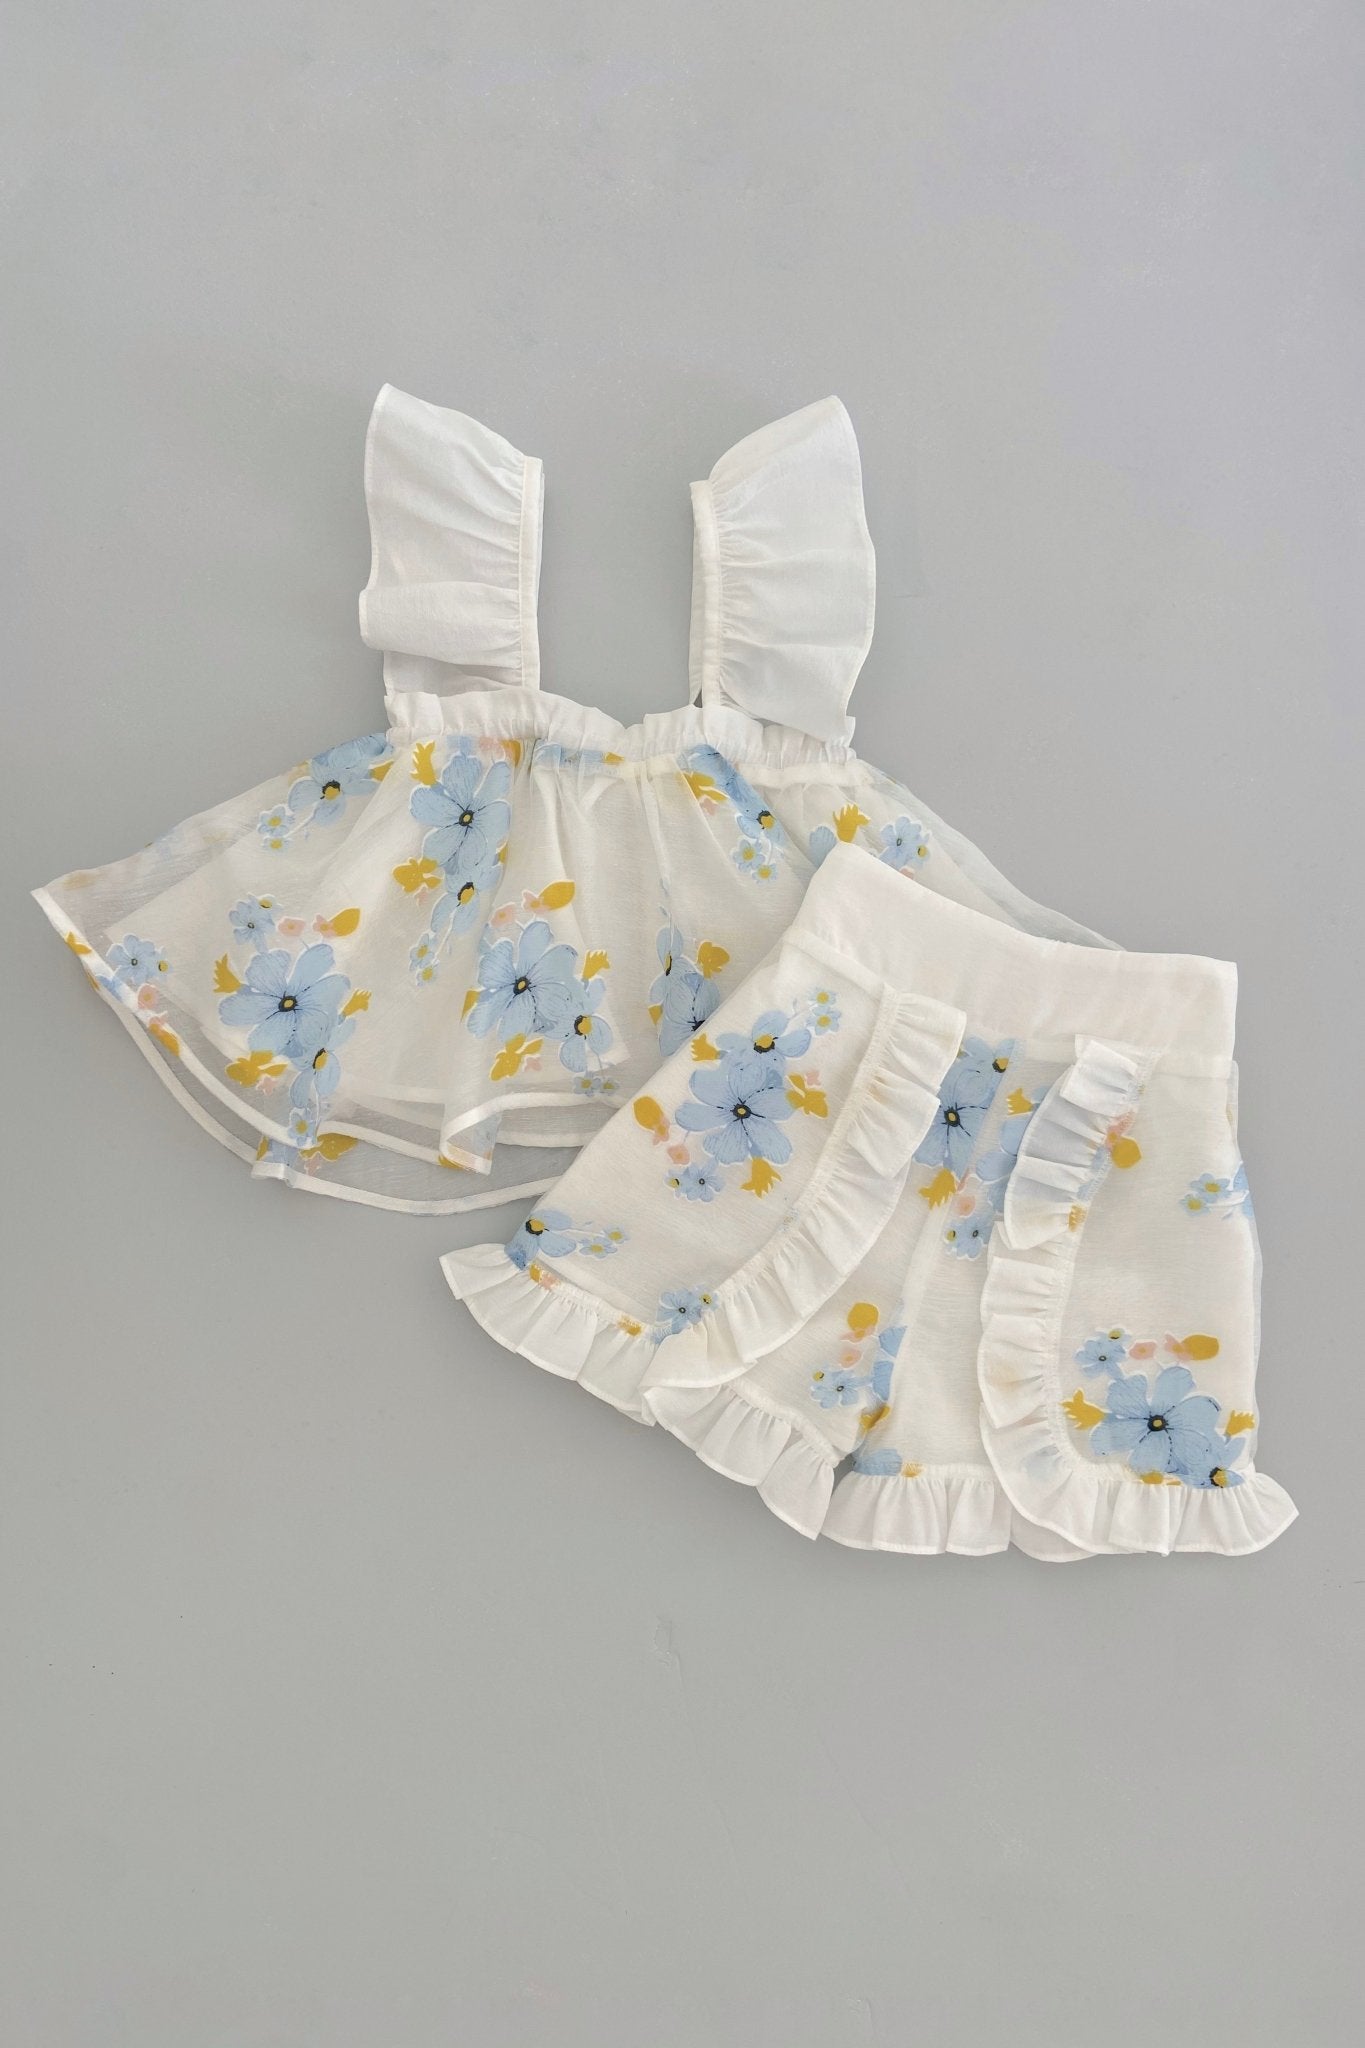 Build Me Up Buttercup Top - Forget Me Not Organza - Chloé and Amélie